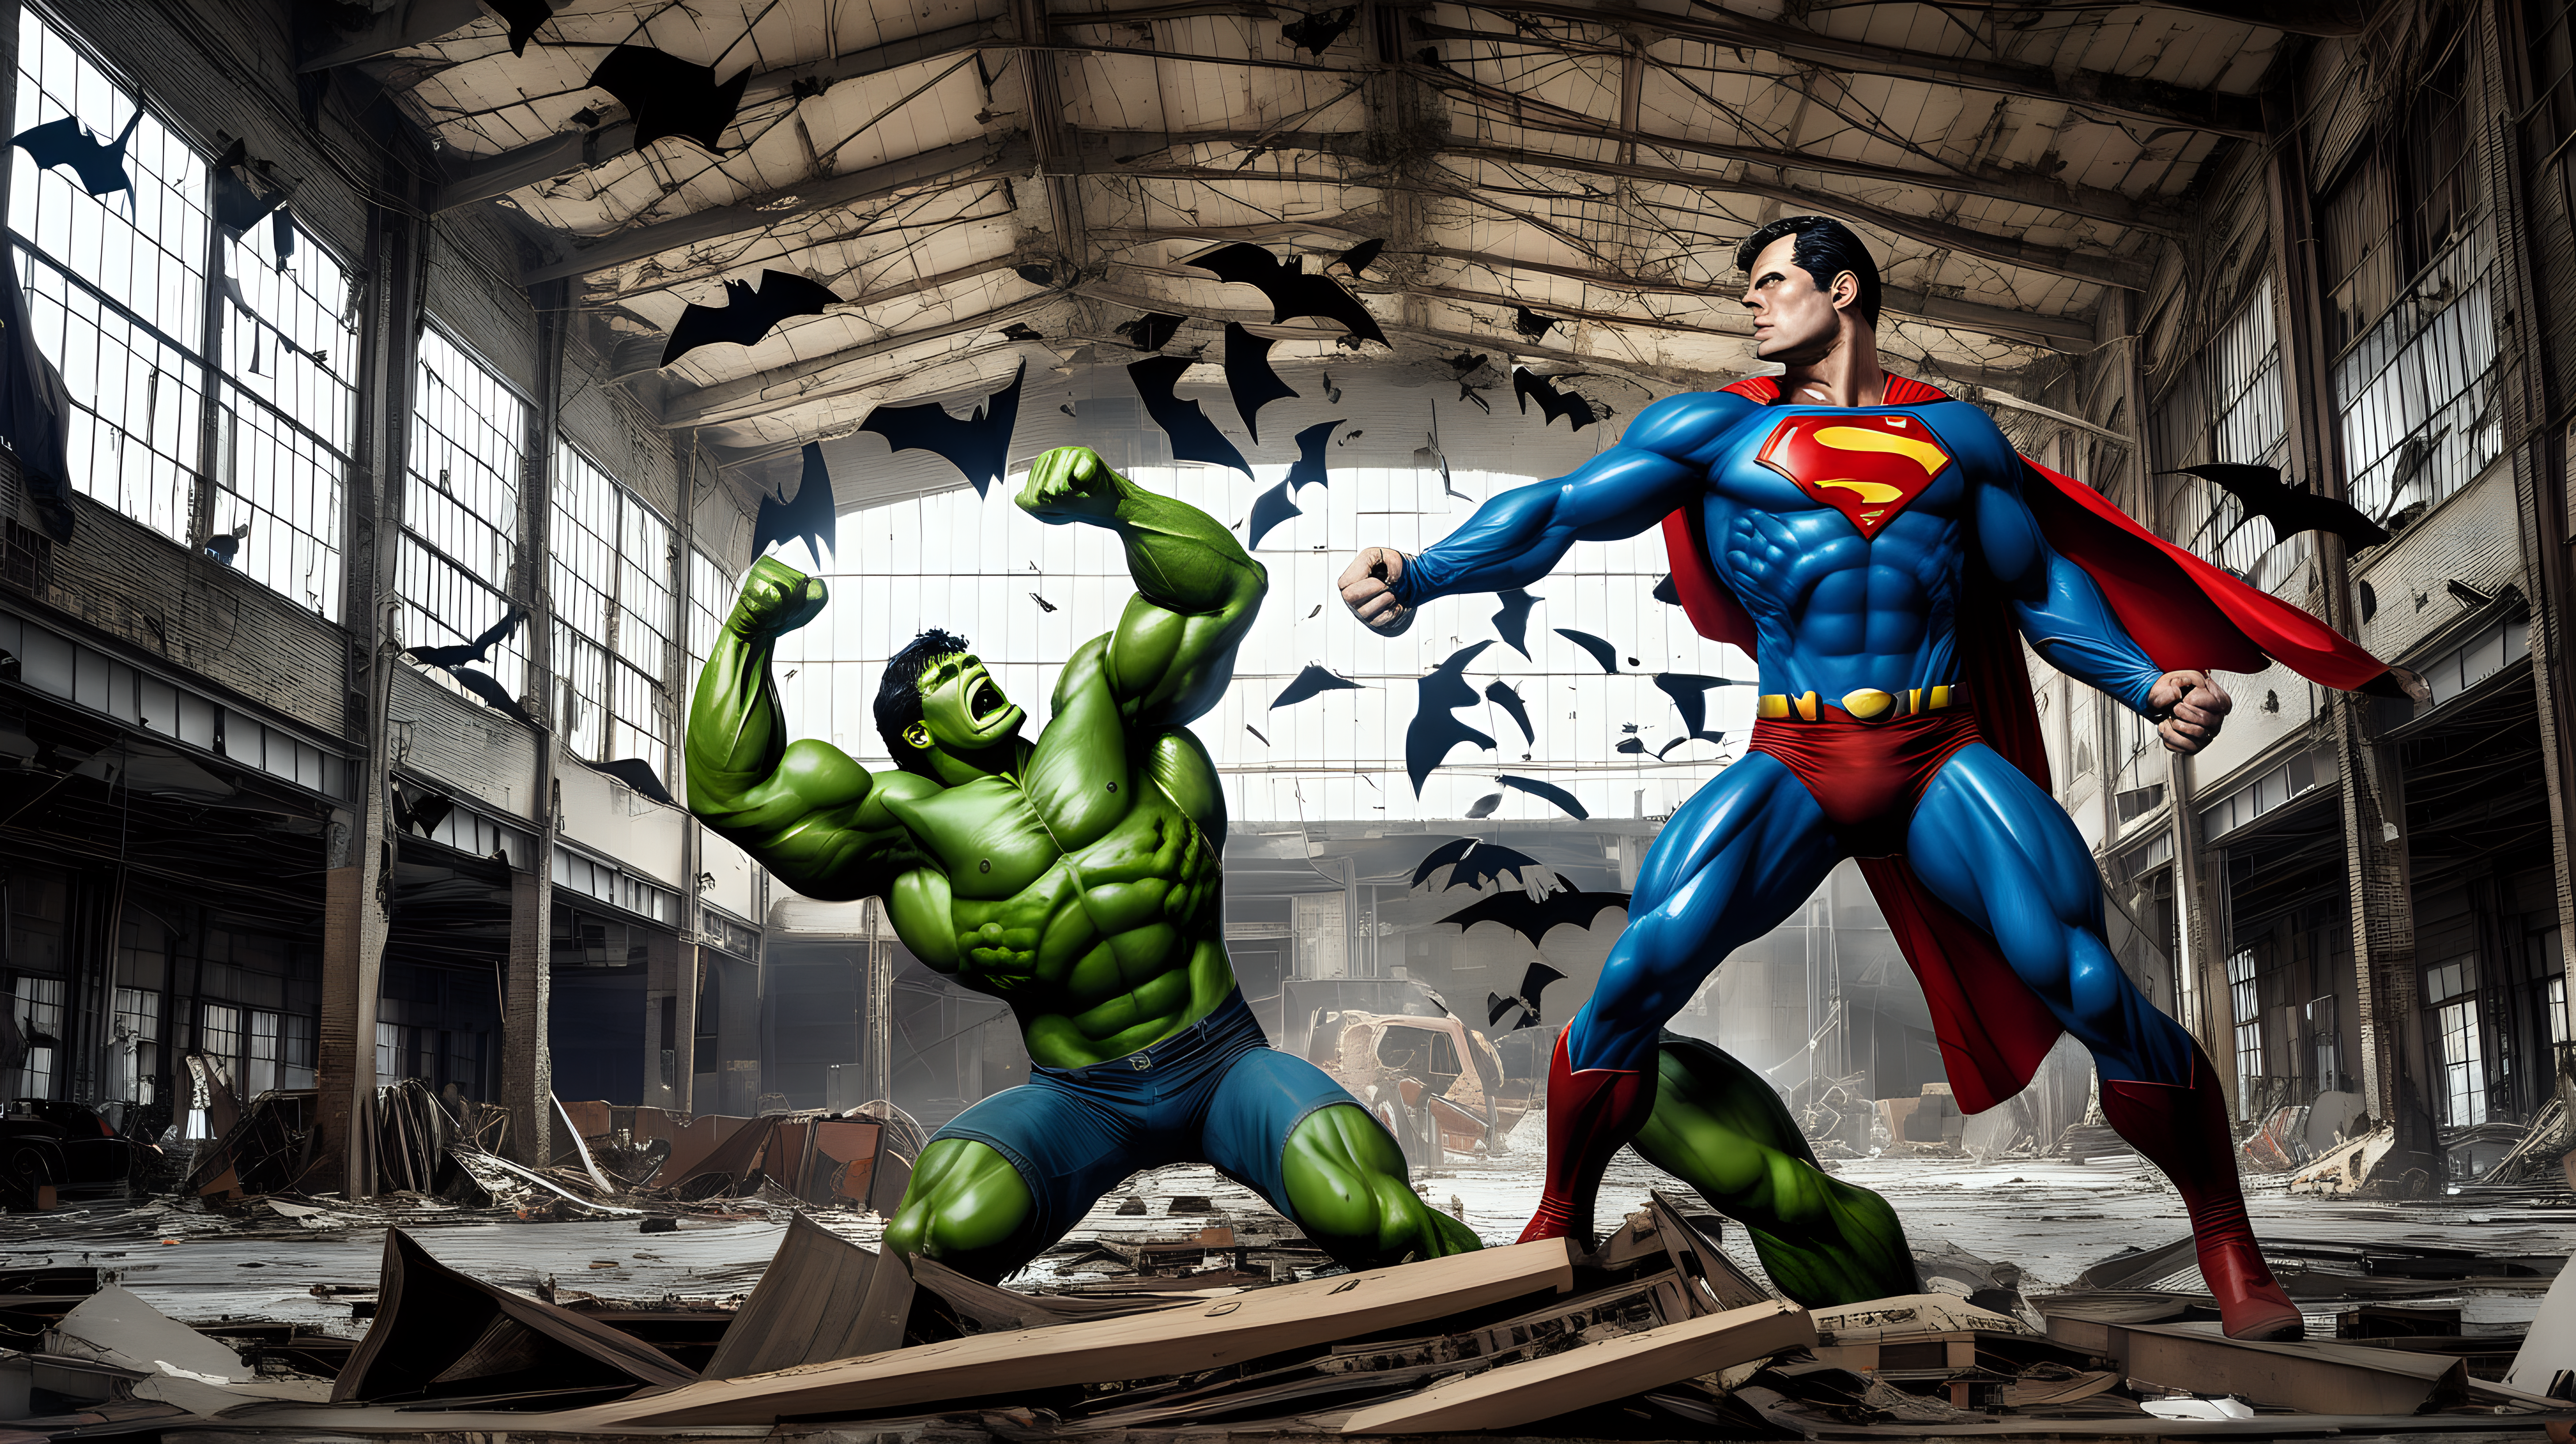 Superman fights the hulk in an abandon guitar factory with bats flying overhead